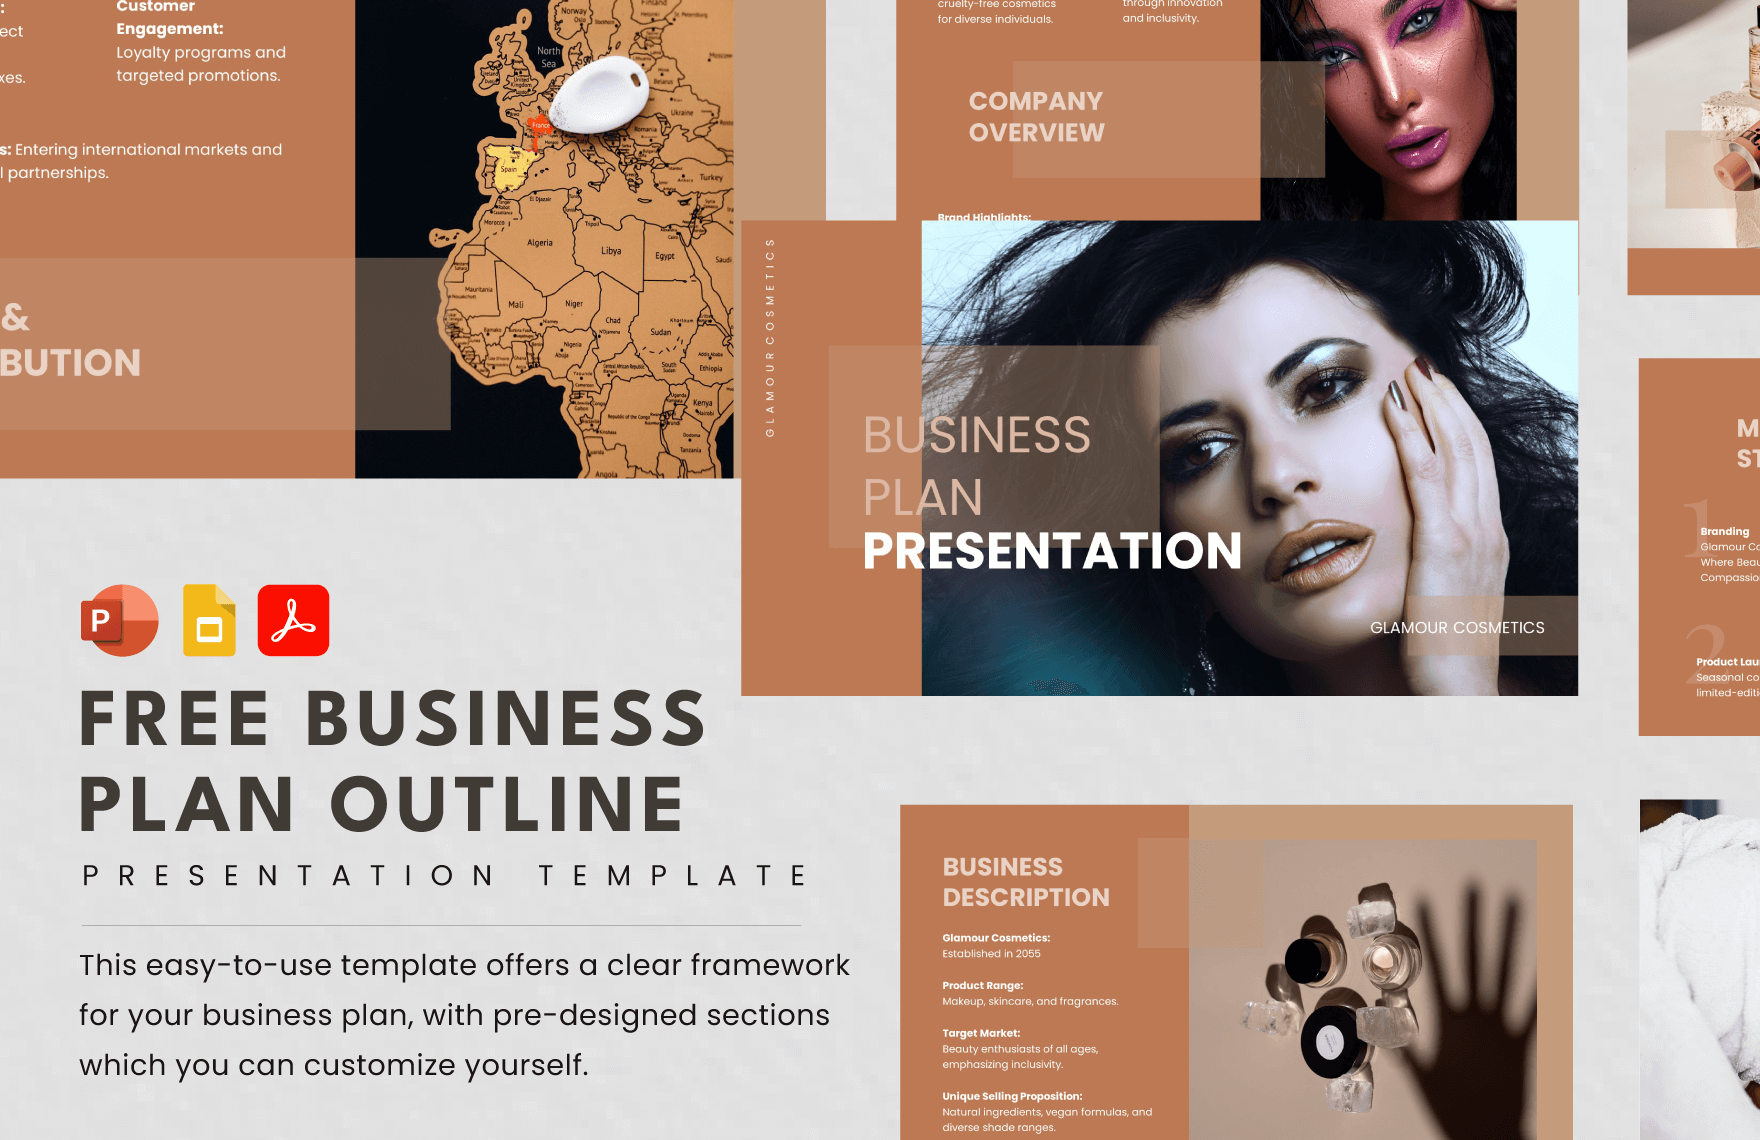 Free Business Plan Outline Presentation Template